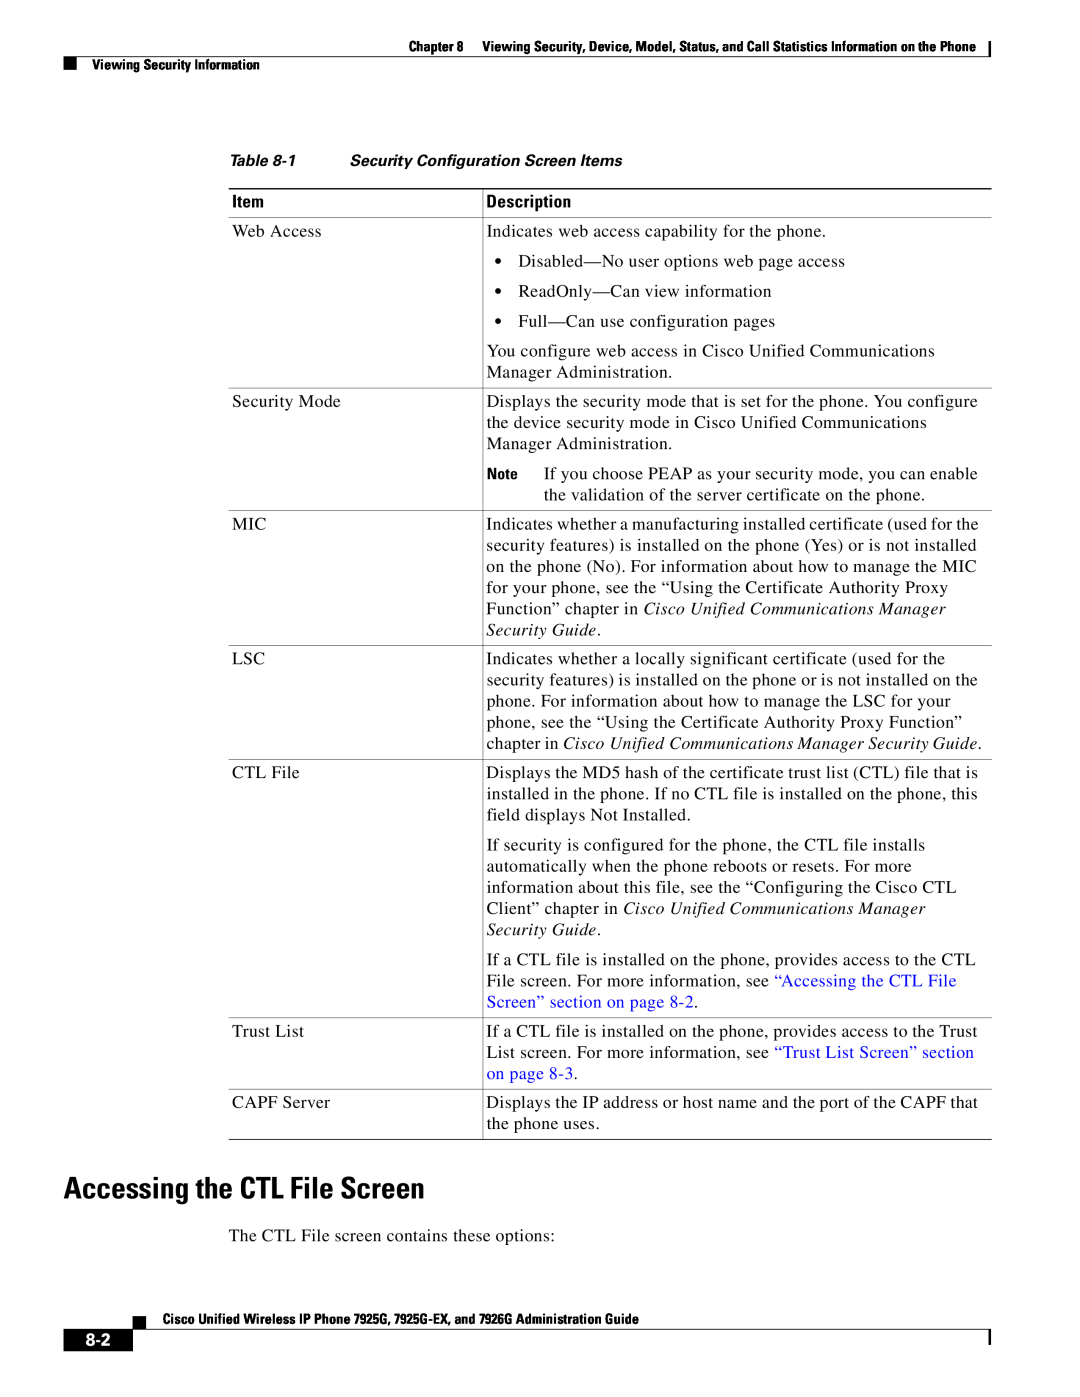 Cisco Systems 7925G-EX, 7926G manual Accessing the CTL File Screen, Description, Security Guide, Screen” section on page 